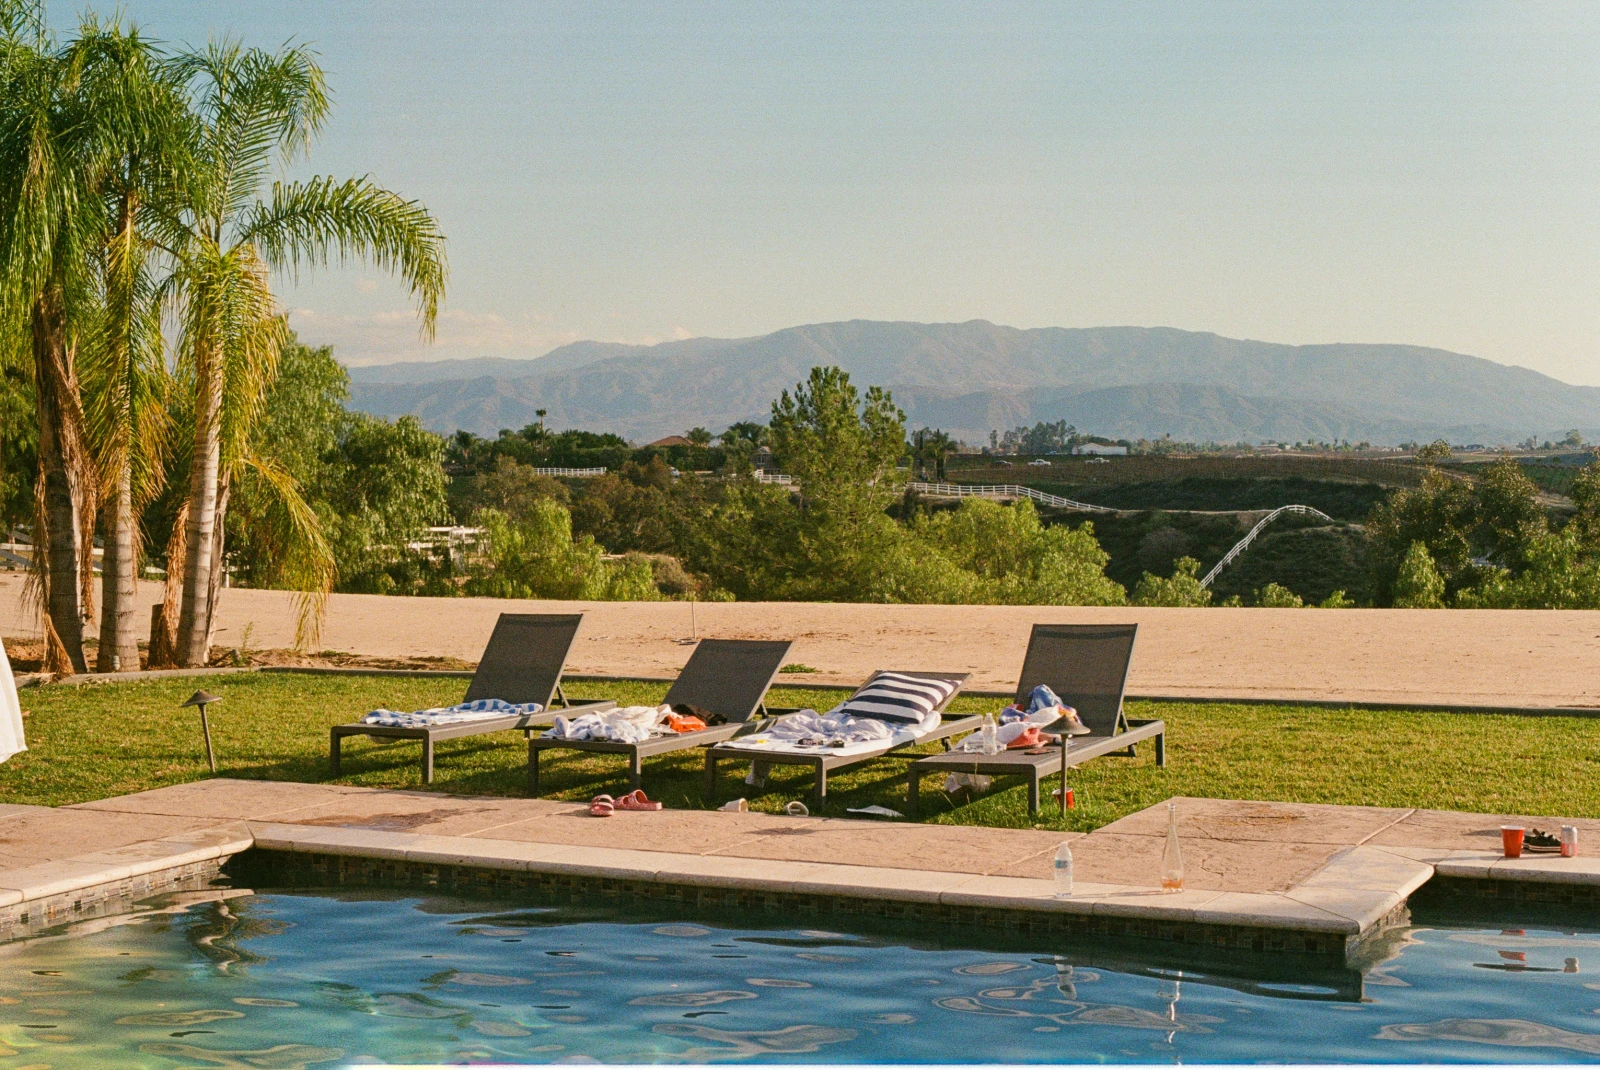 Poolside and nature in Temecula. 